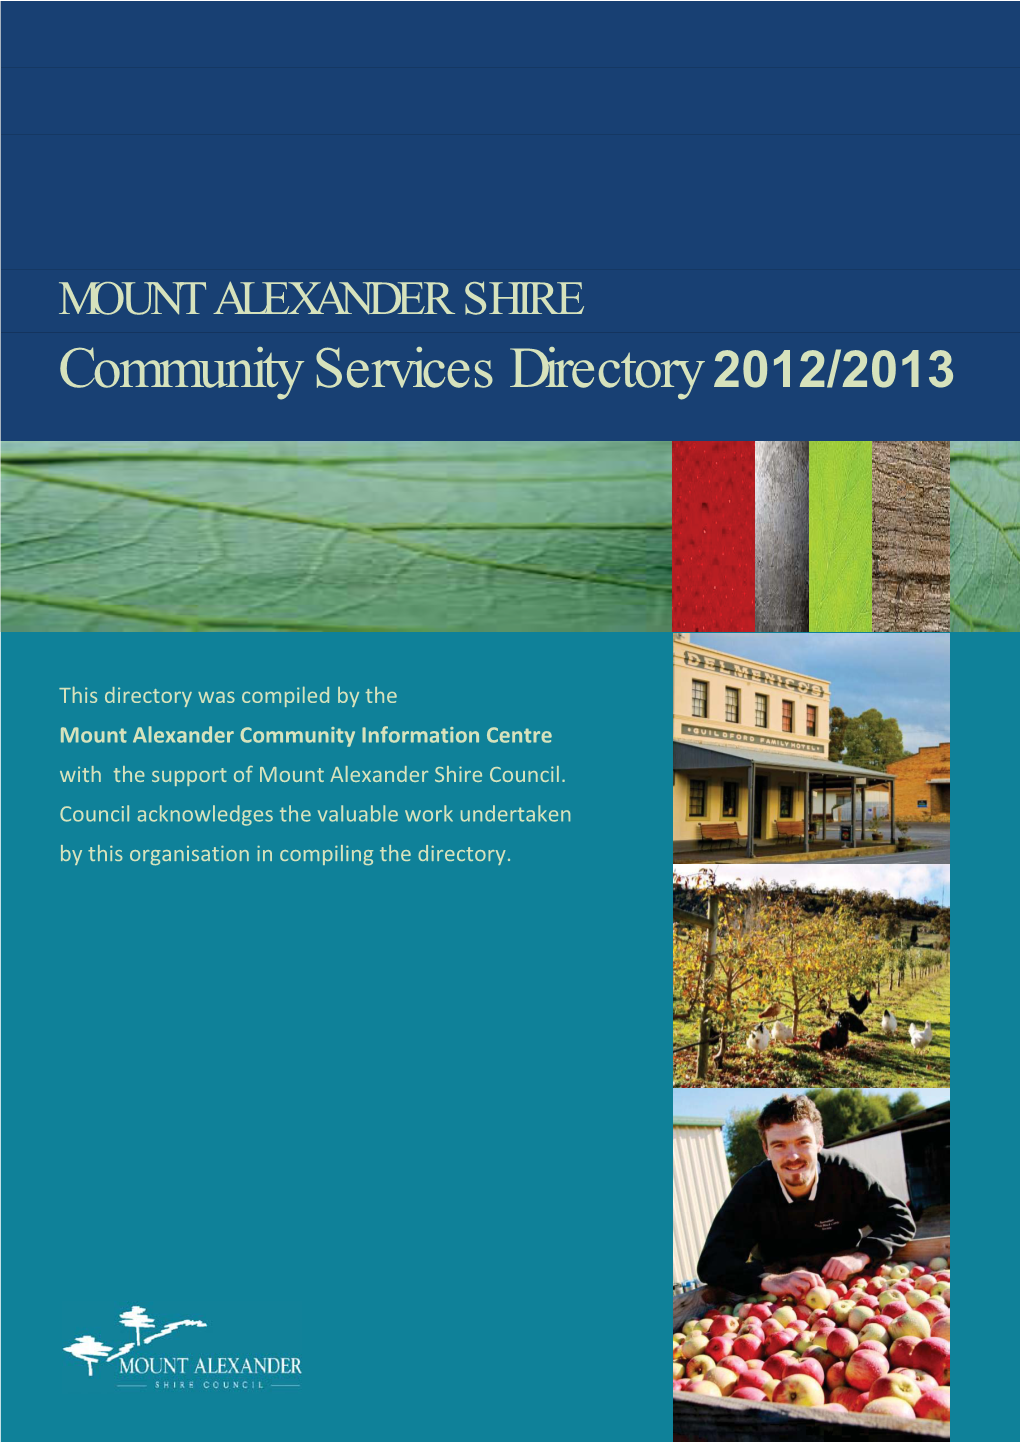 Community Services Directory 2012/2013